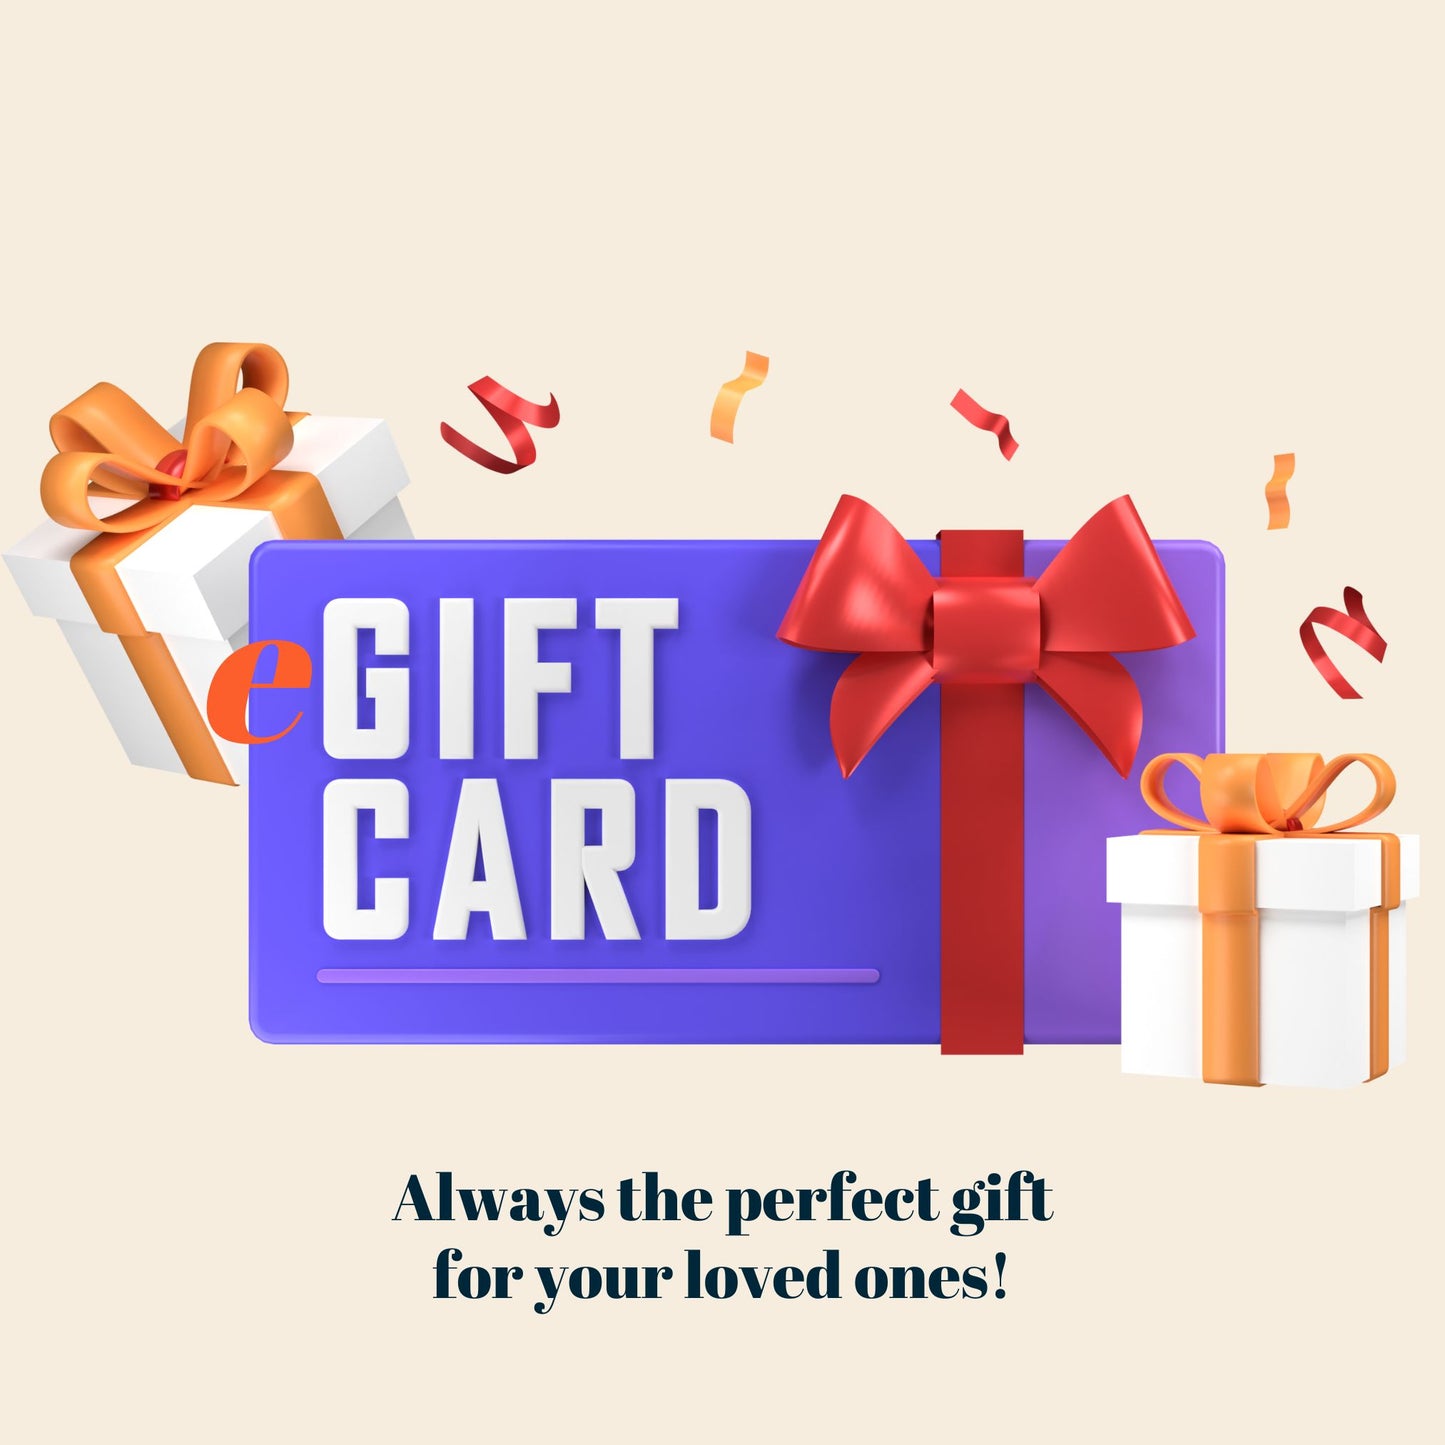 E-Gift Card | Let Them Choose Their Own Gift